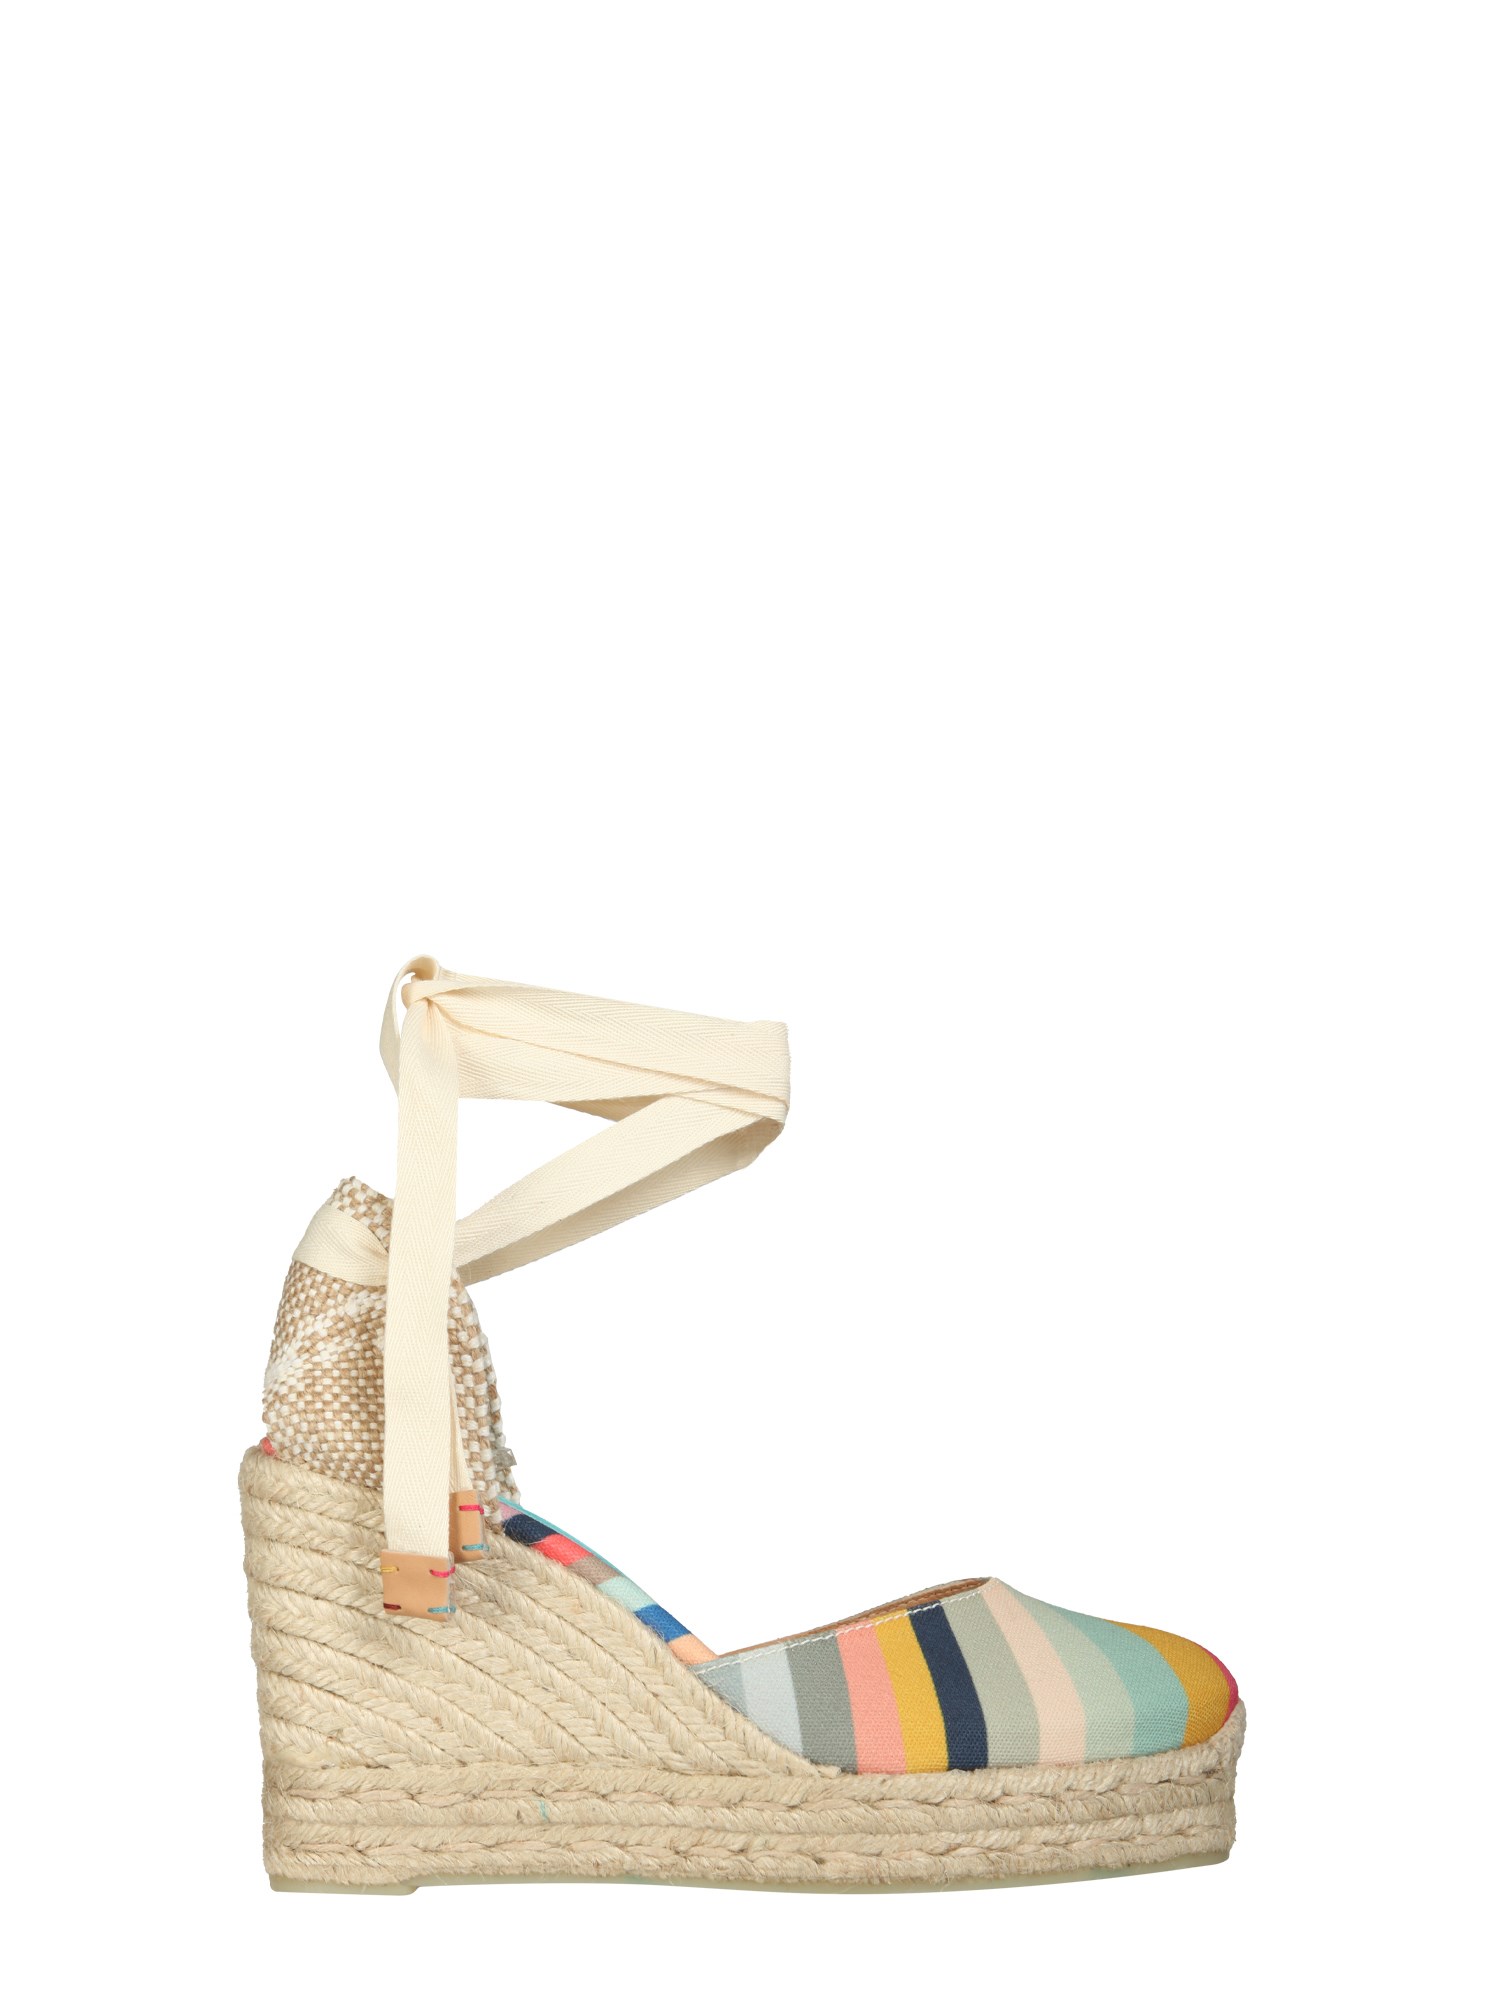 Castaner By Paul Smith High heels "CARINA" WEDGE ESPADRILLES